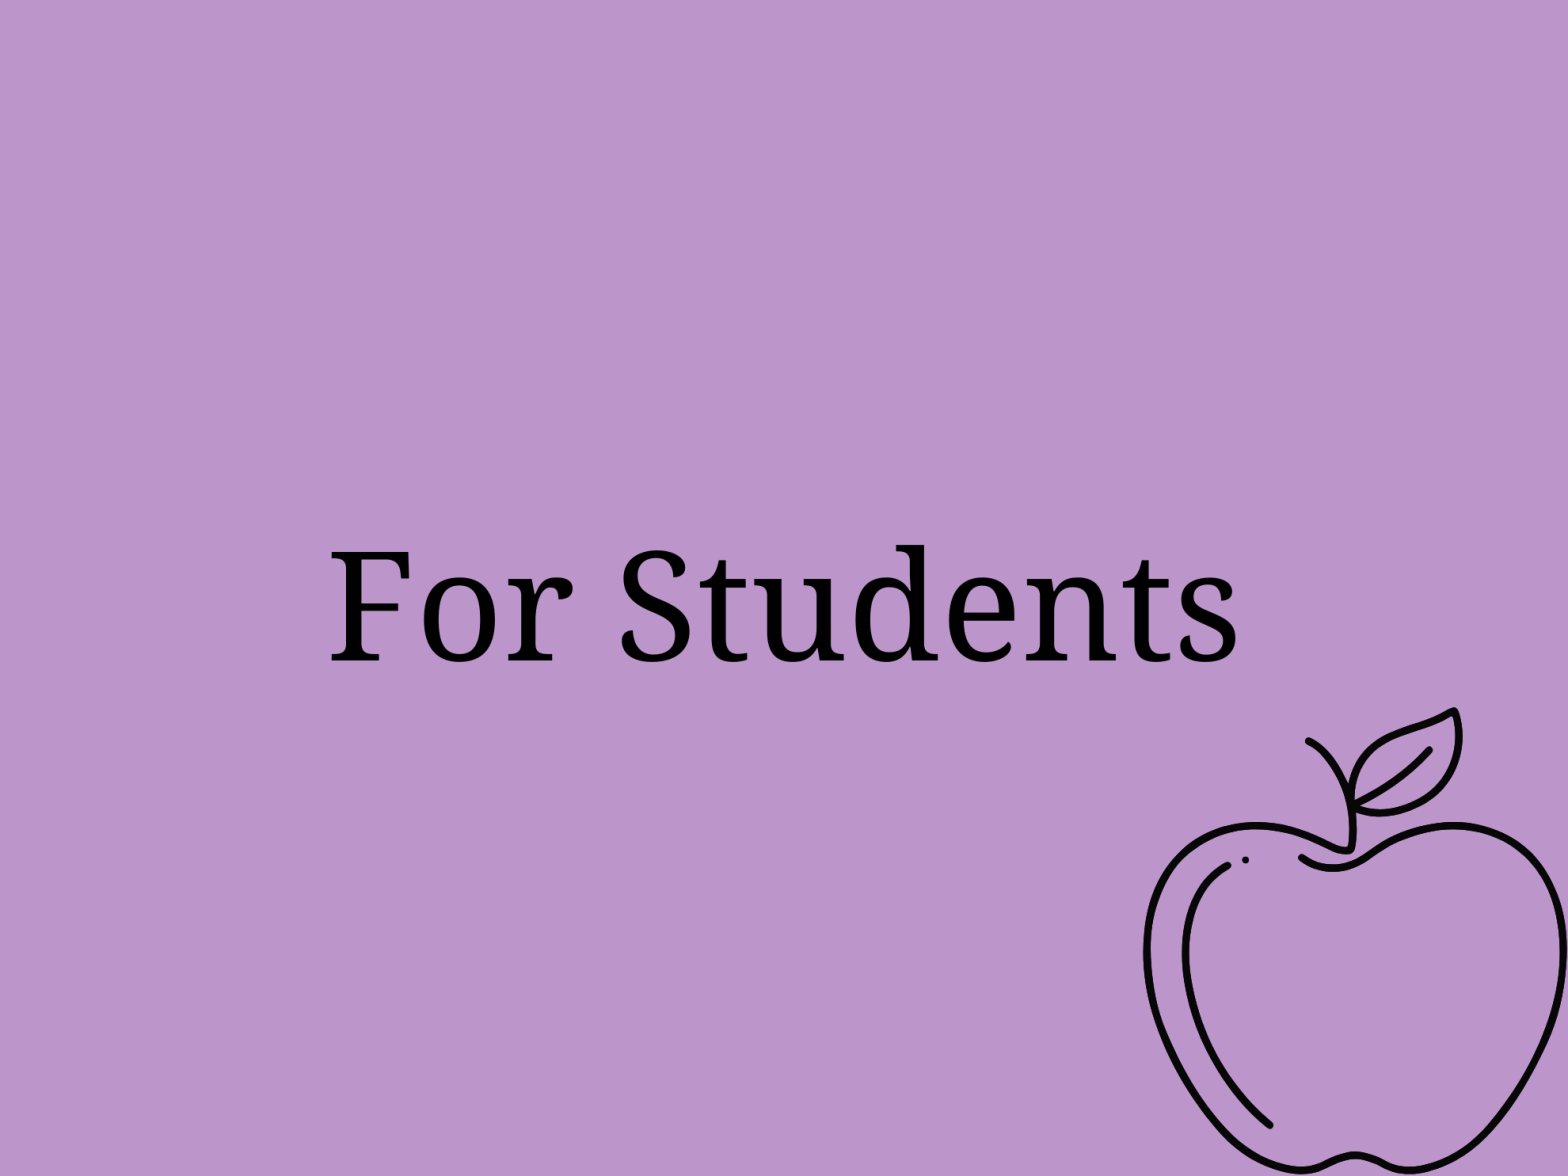 Cover image showing the text for students and an apple in the bottom right corner, set on a purple background